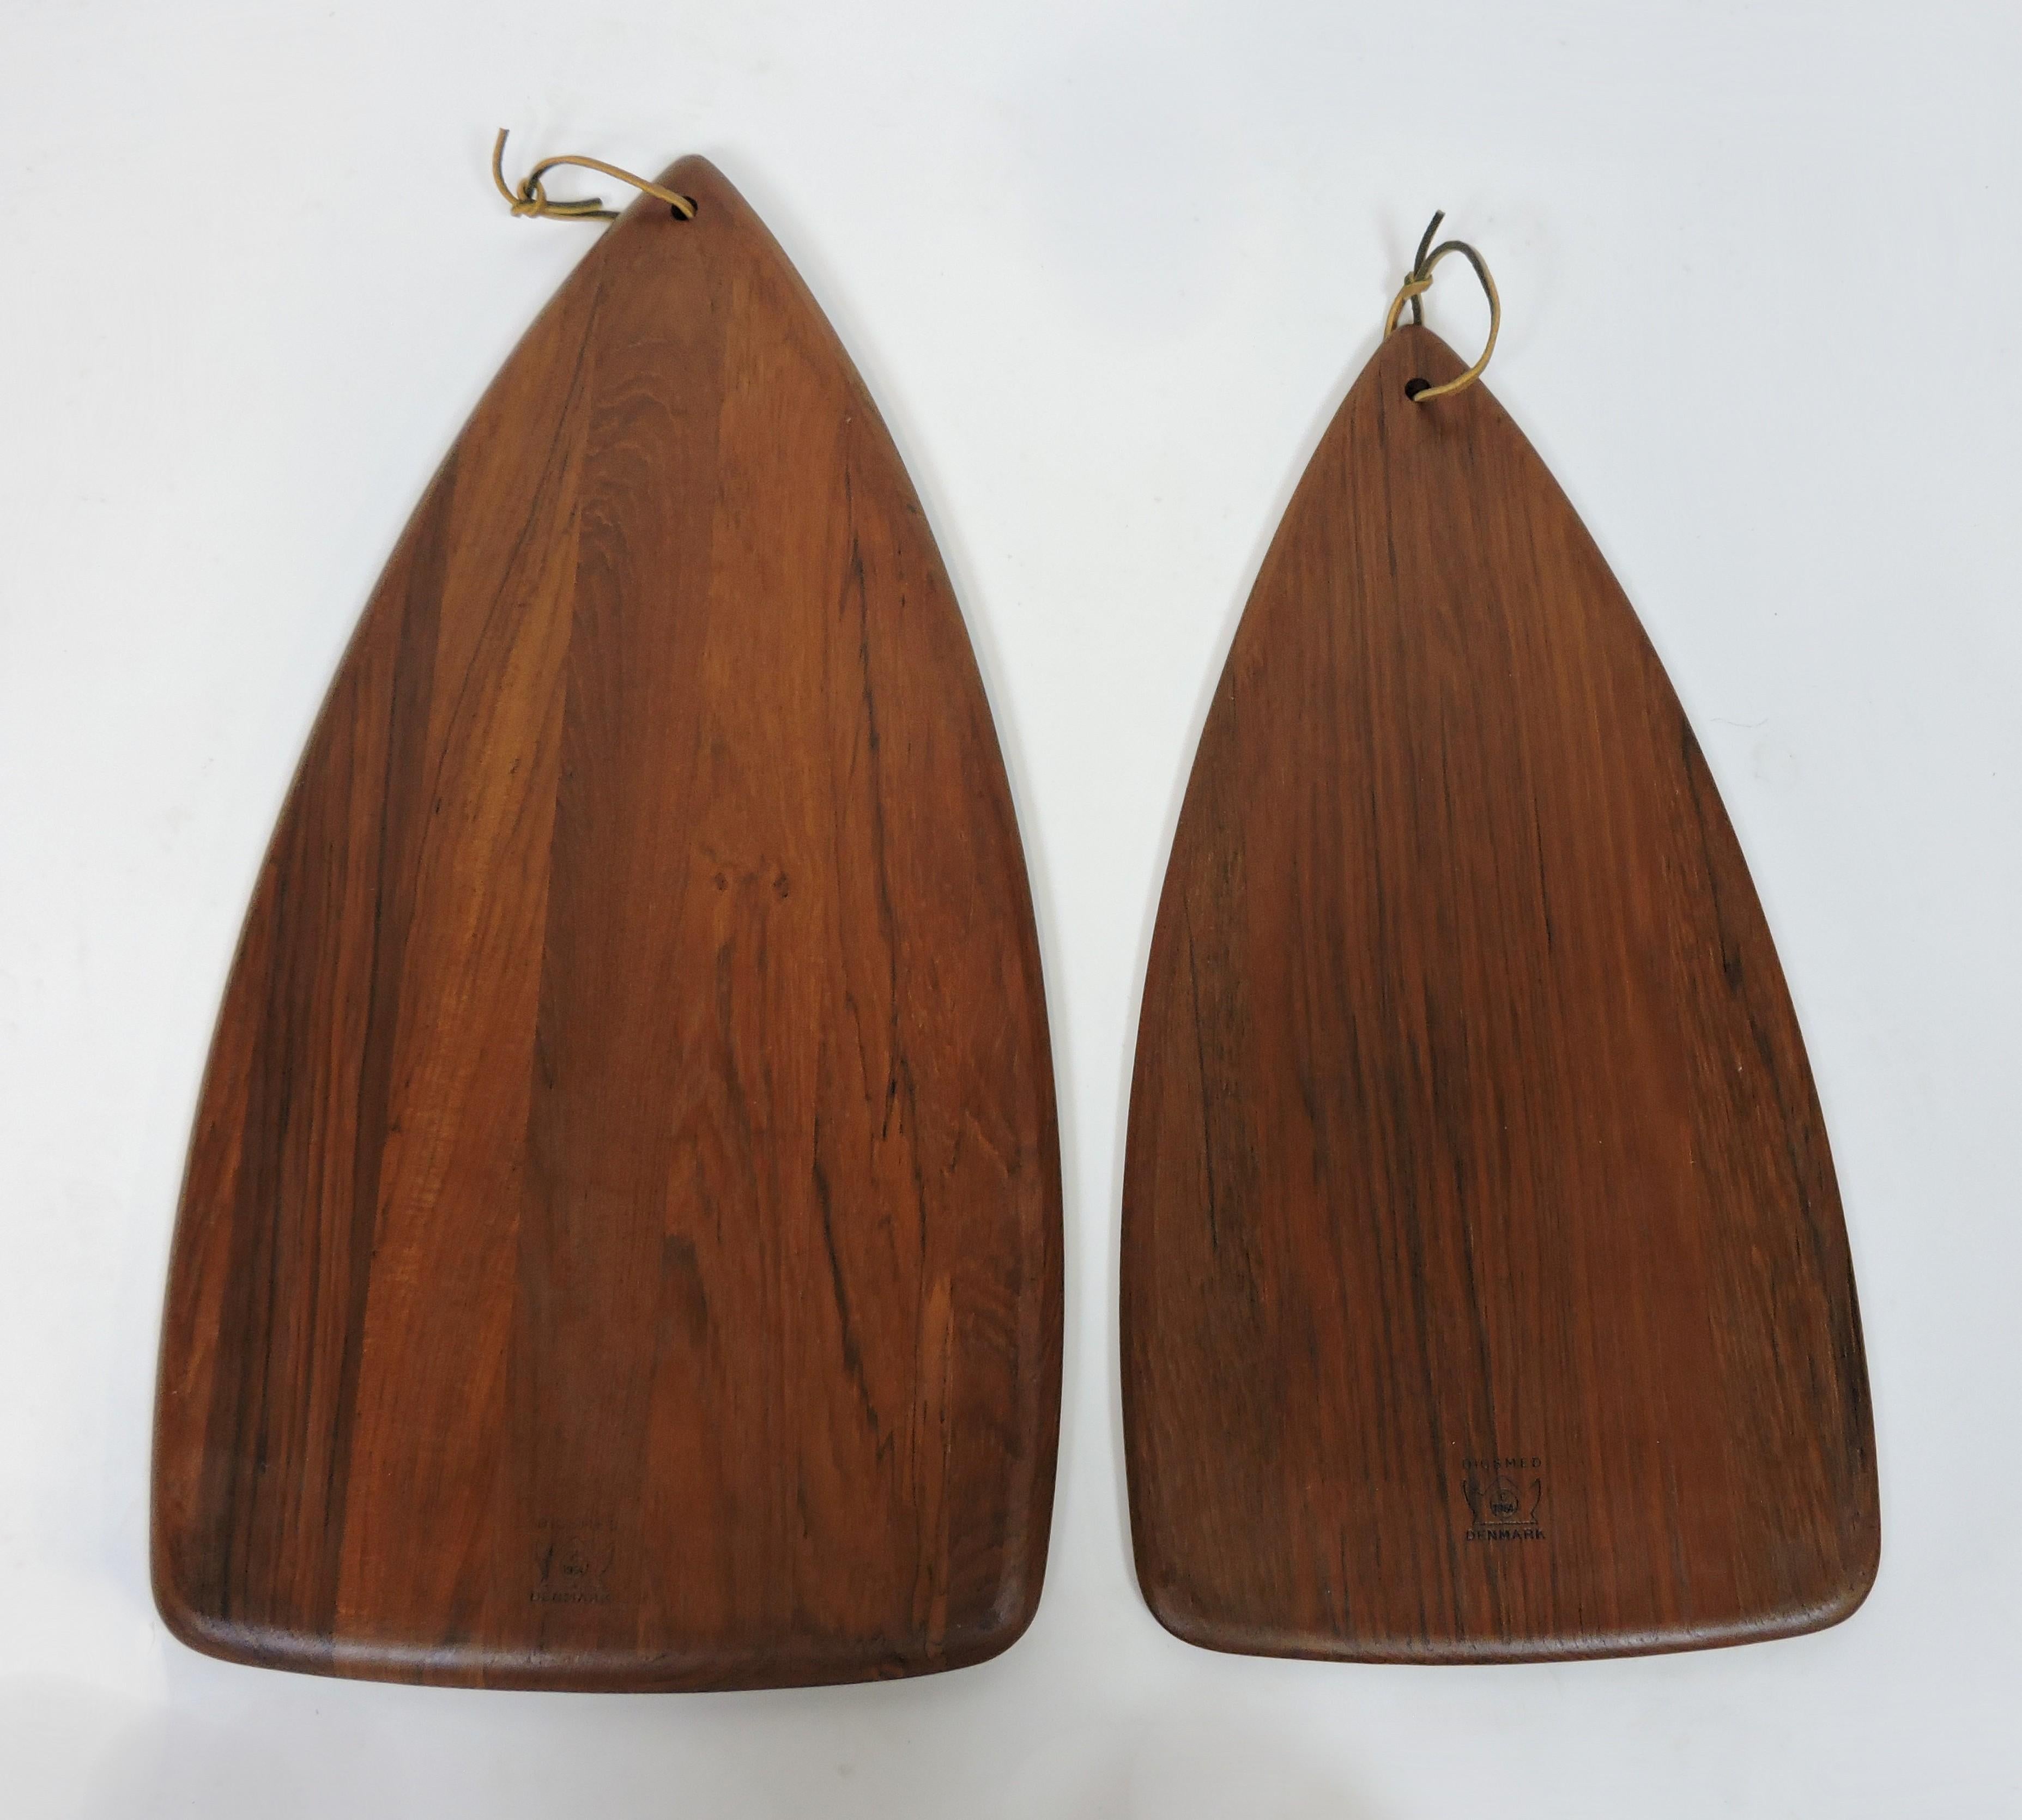 Beautiful set of two Digsmed of Denmark teak cutting boards. The larger one is 22 inches long and the smaller is 18.5 inches long. They have a triangular shape with inset magnets to hold a knife and stack together neatly for storage.